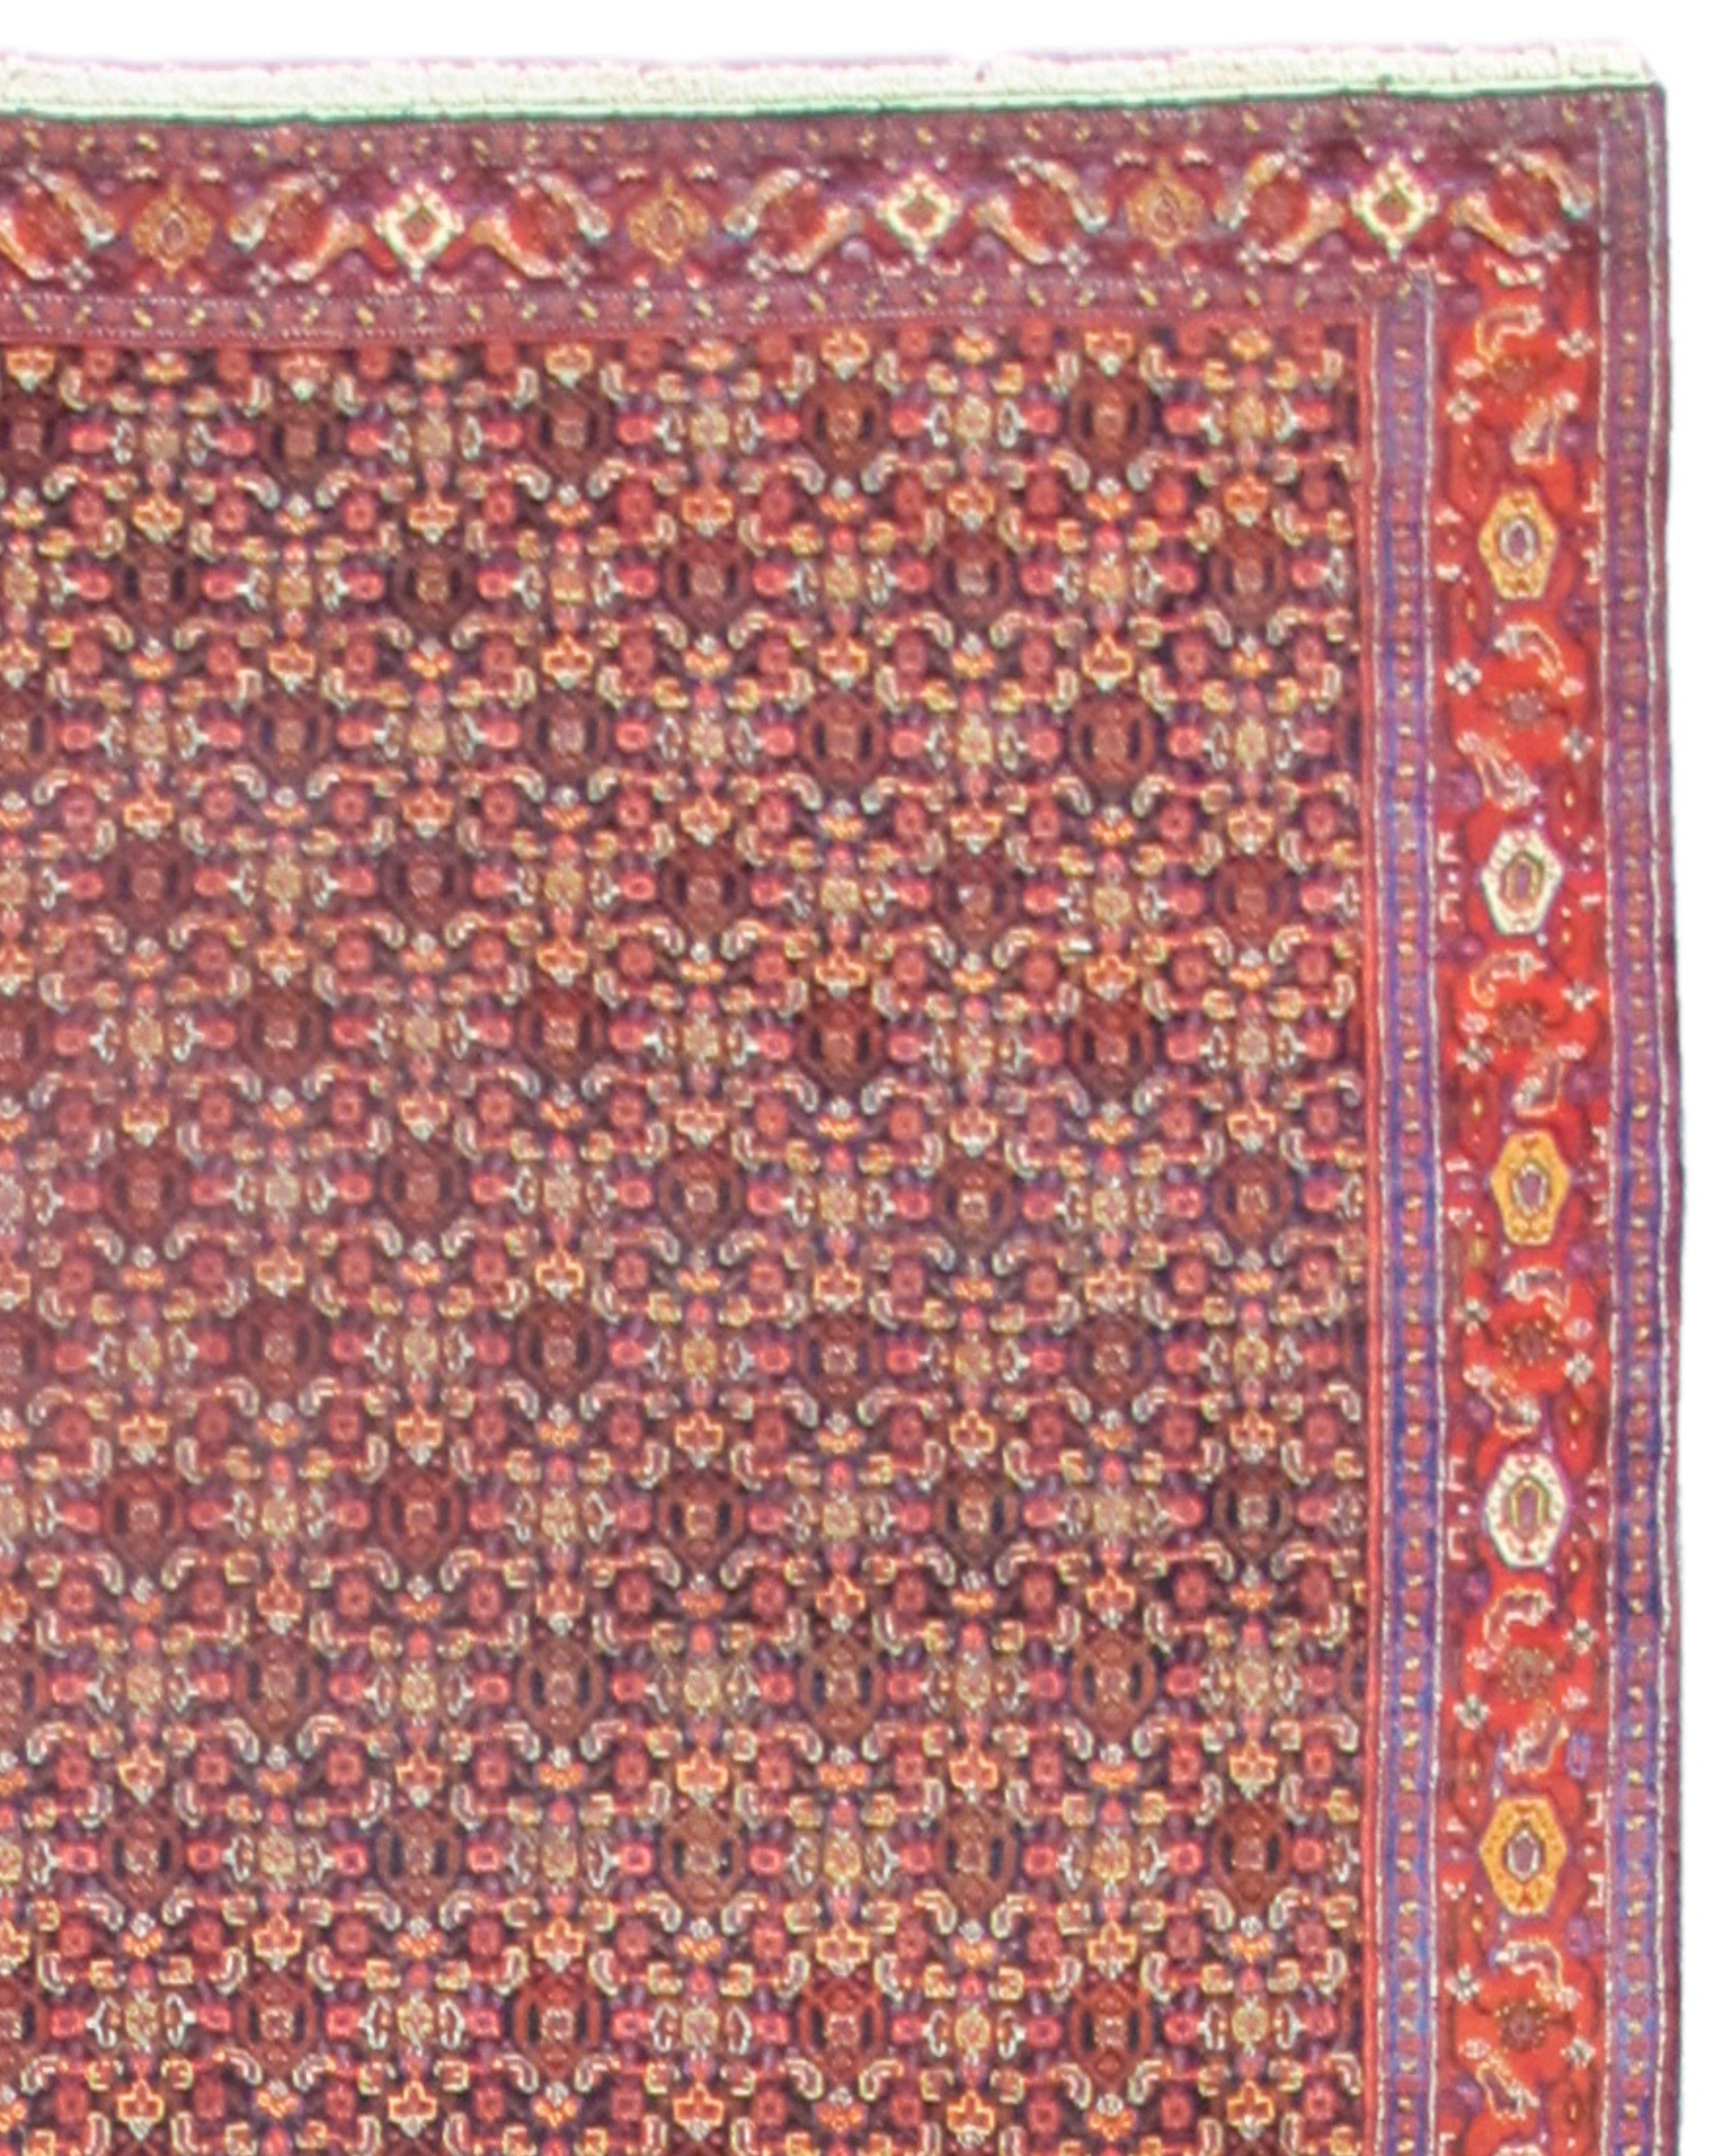 Antique Persian Senneh Long Rug, c. 1900

Additional Information:
Dimensions: 7'2